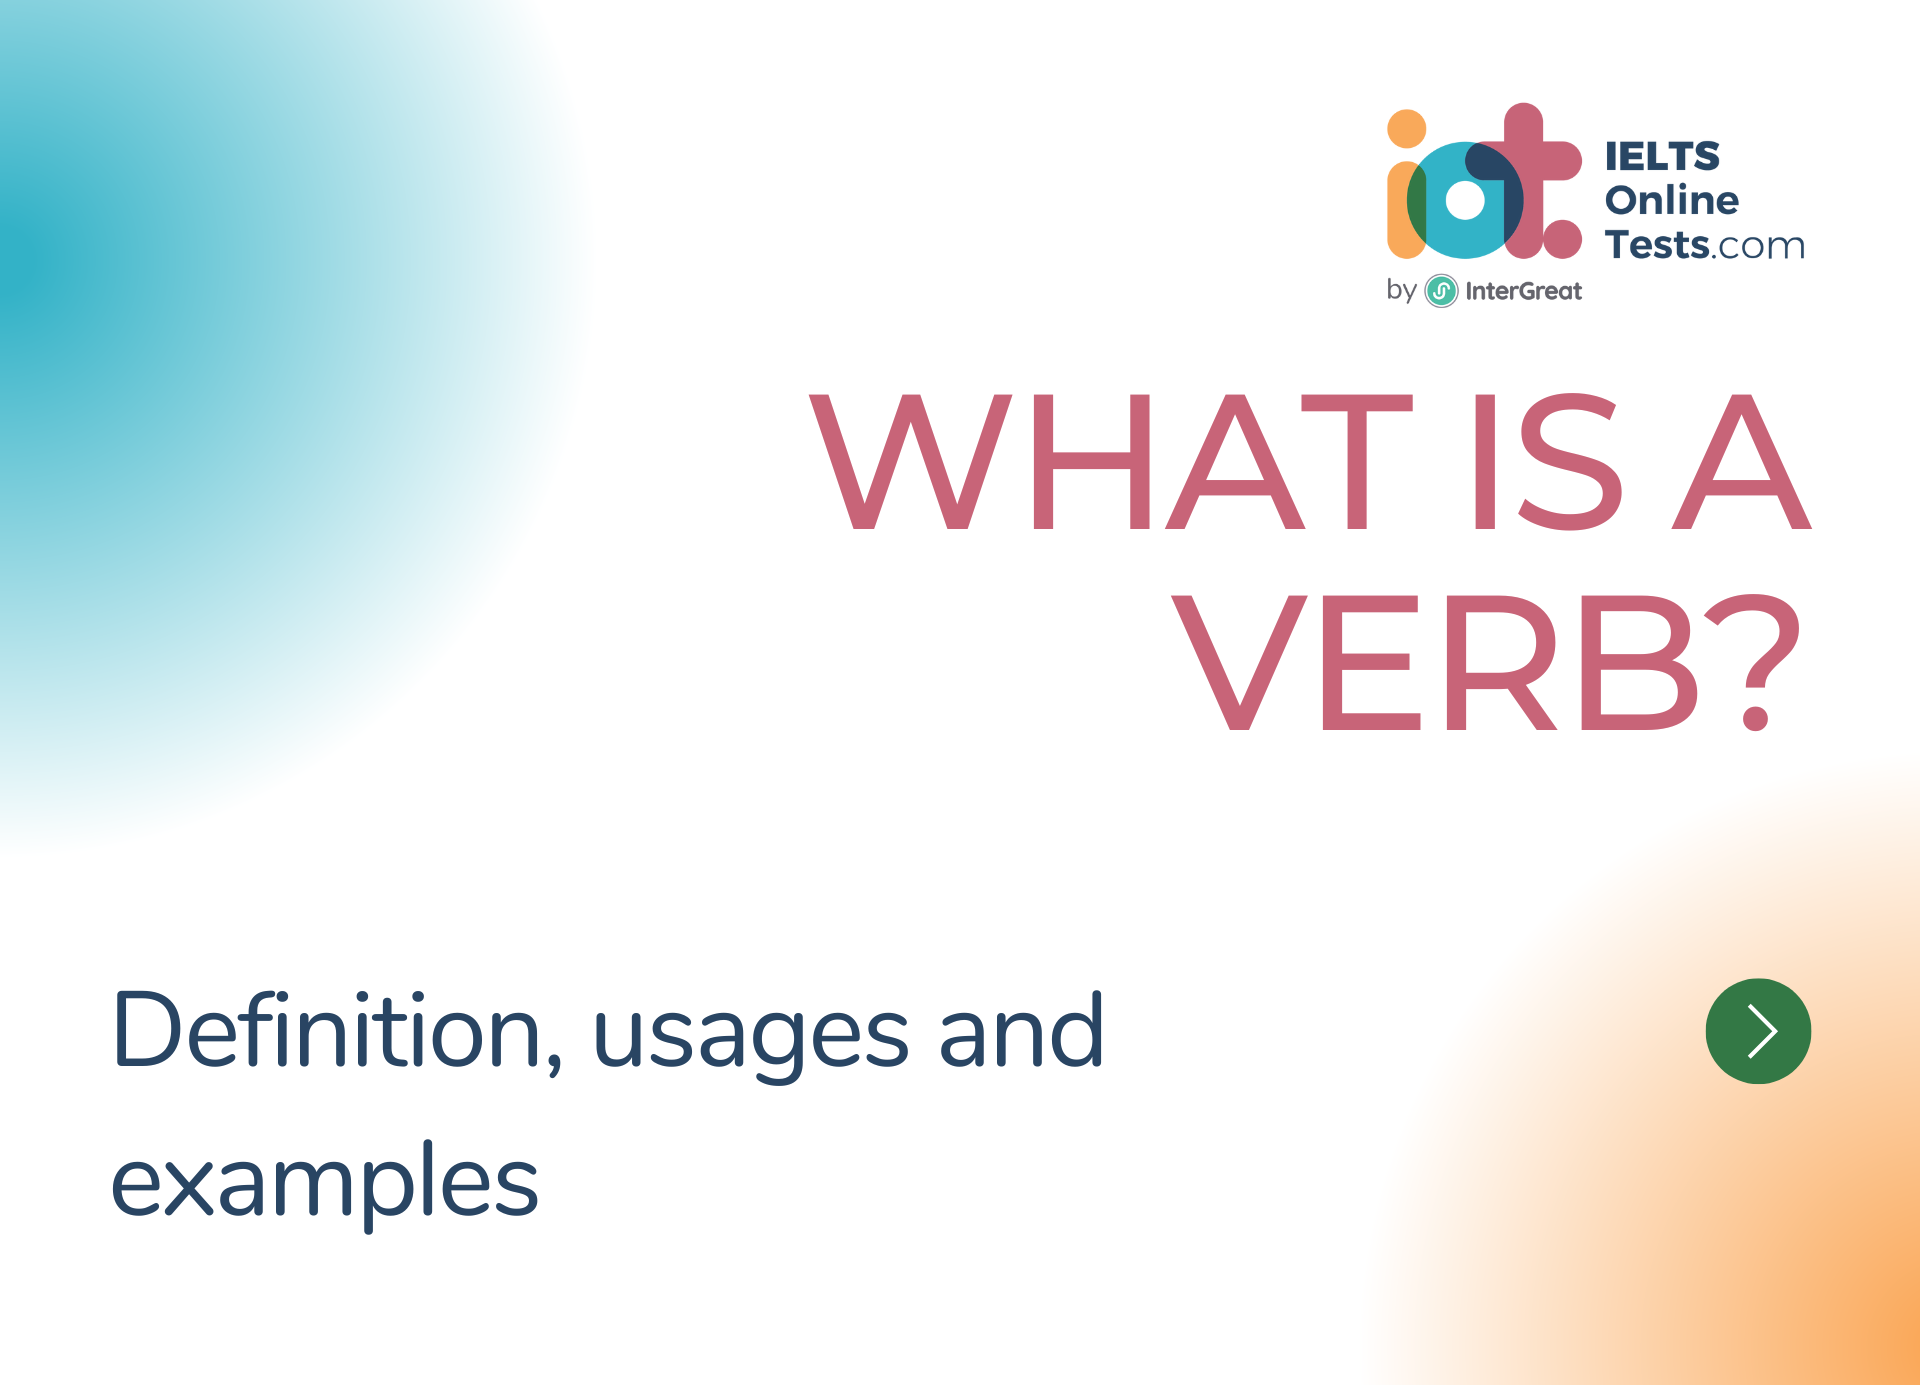 What is a verb in English?